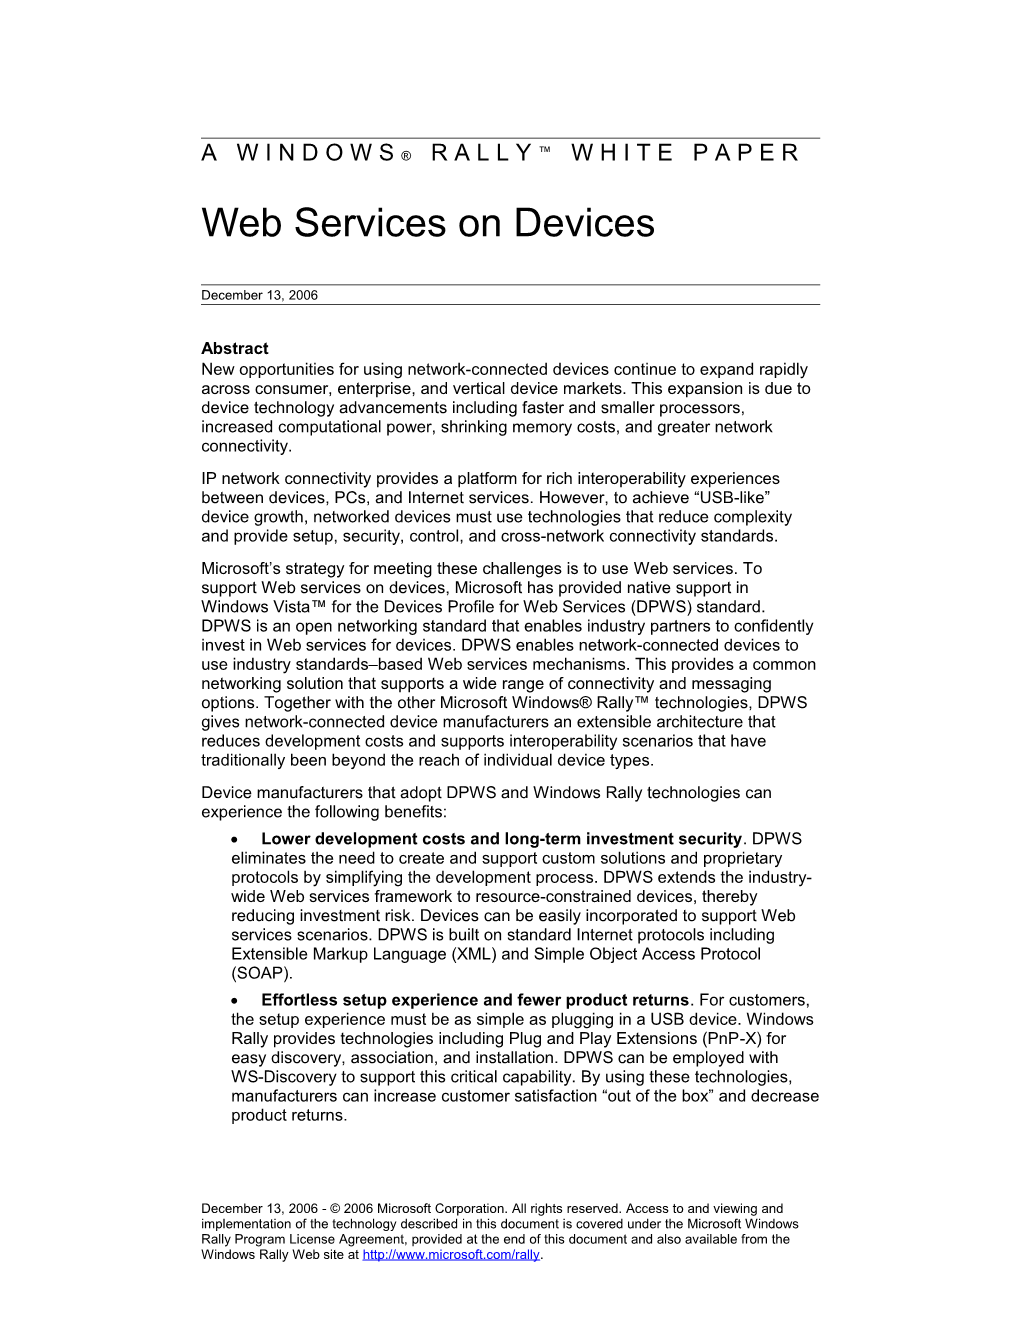 Web Services on Devices